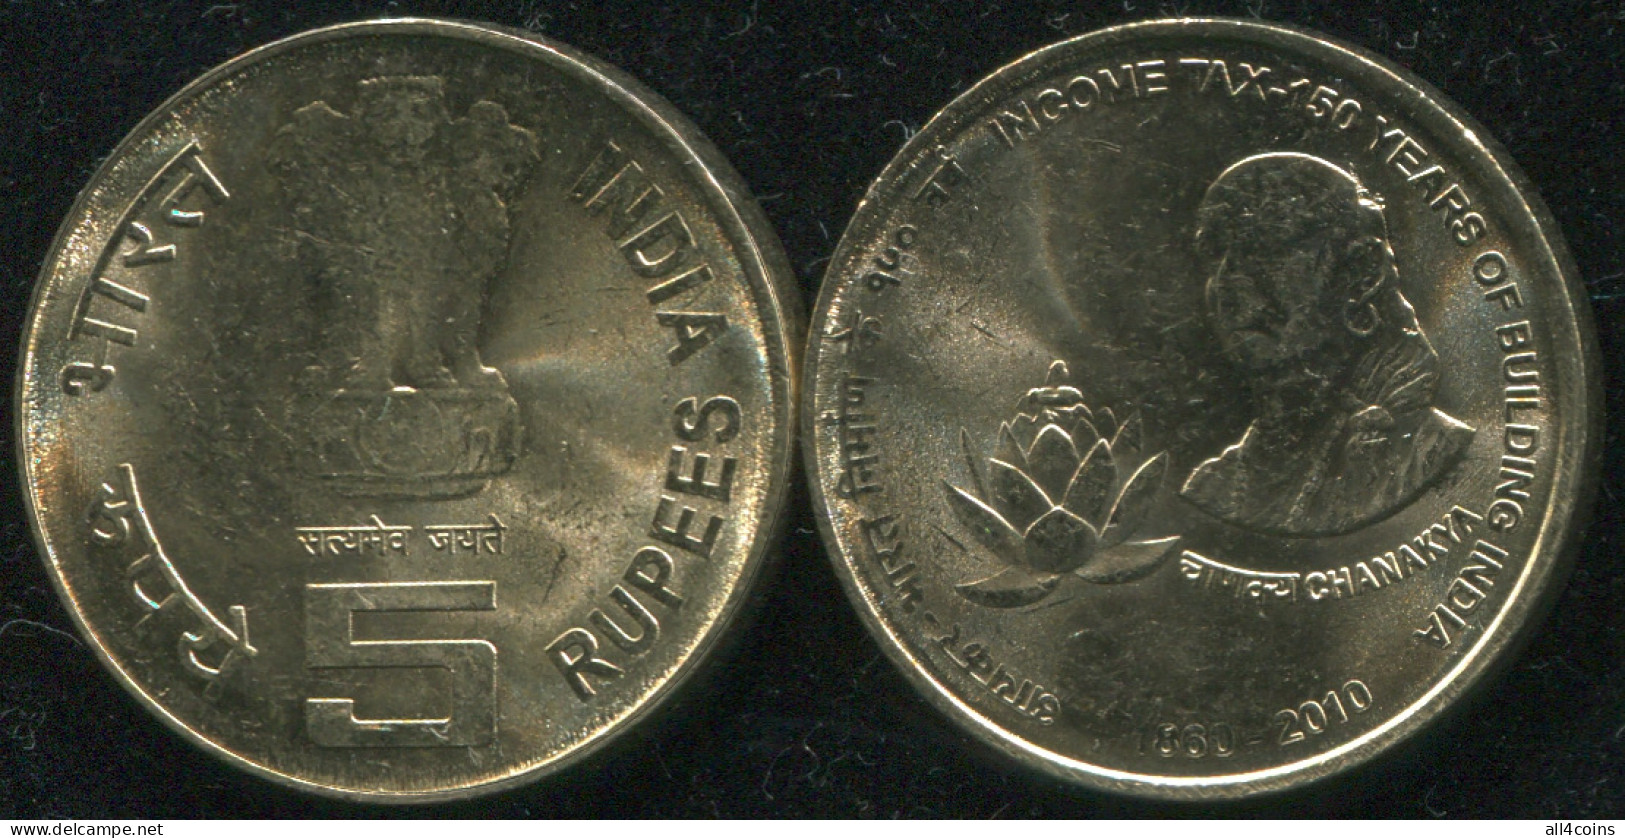 India. 5 Rupees. 2010 (Coin KM#379. Unc) 150 Years Of Building India - Inde